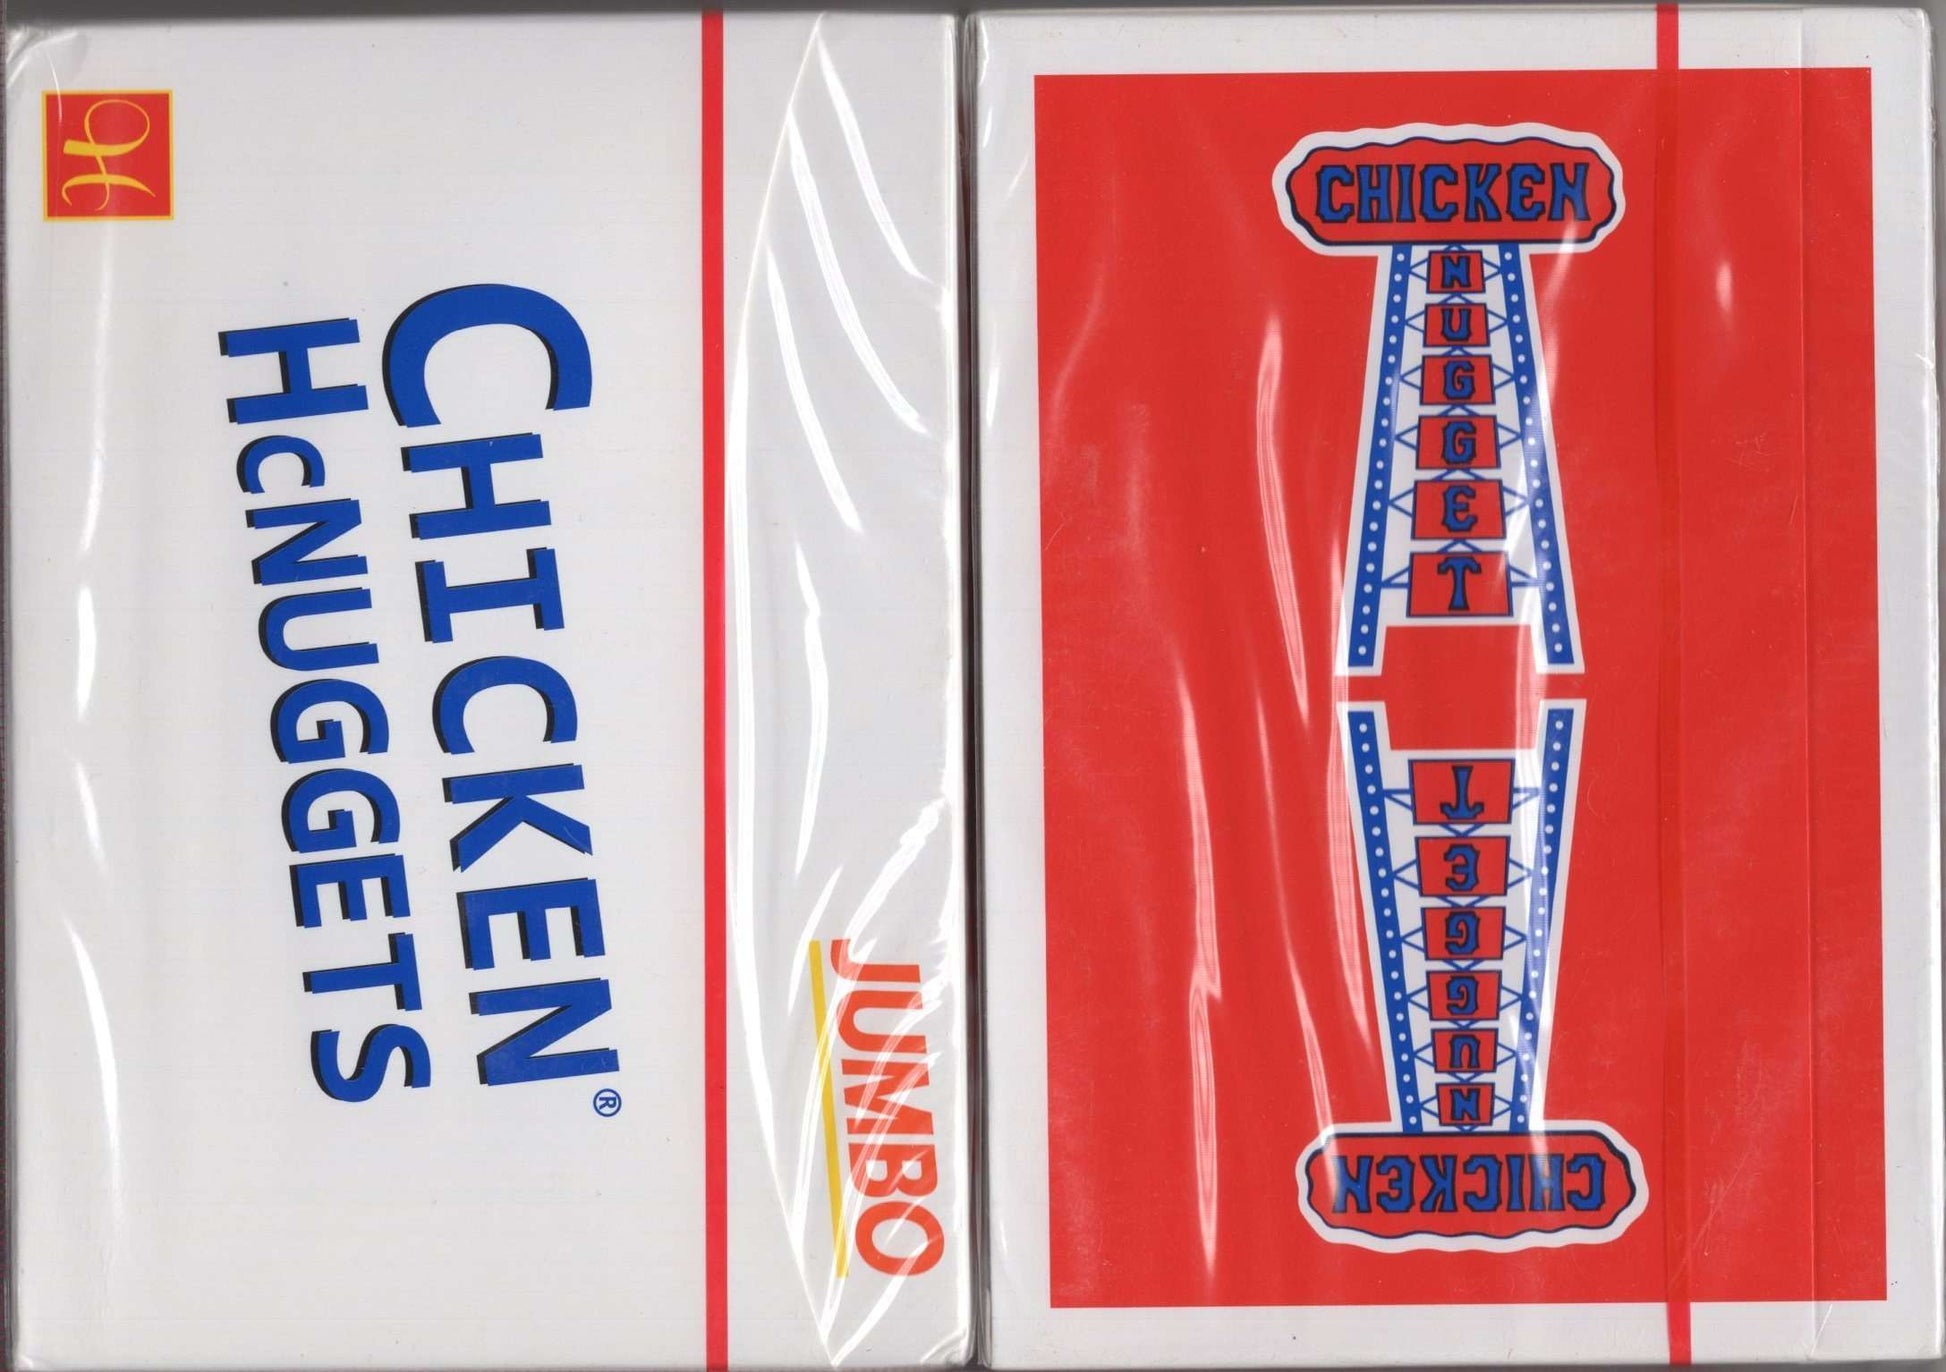 PlayingCardDecks.com-Jumbo Chicken Nugget Red Playing Cards HCPC